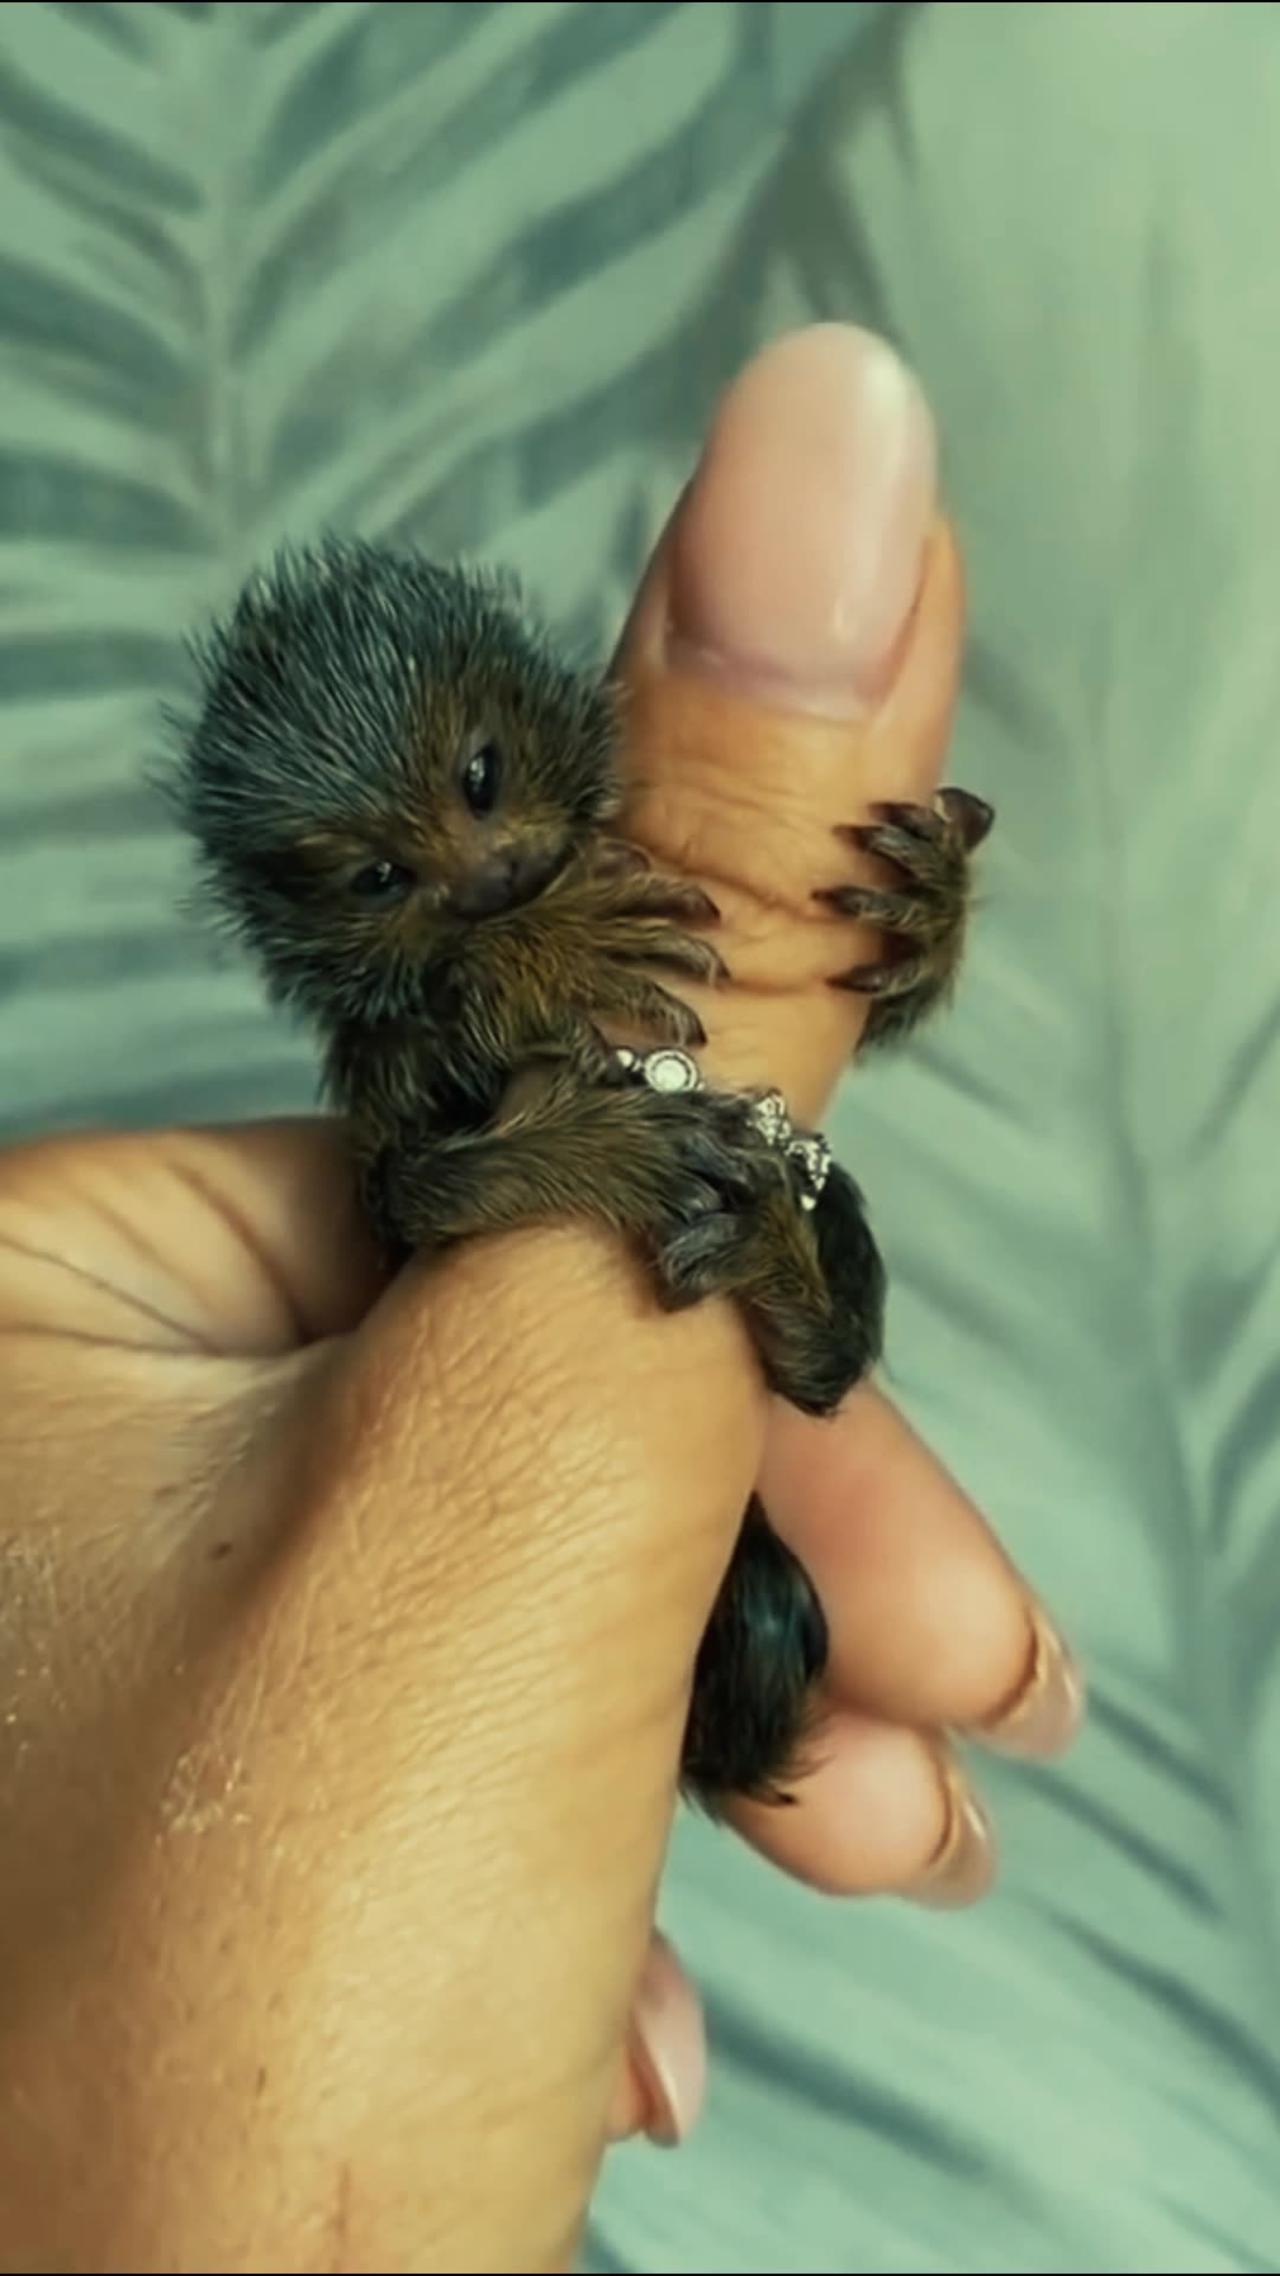 Its a Real Finger Monkey | Can You Believe it |